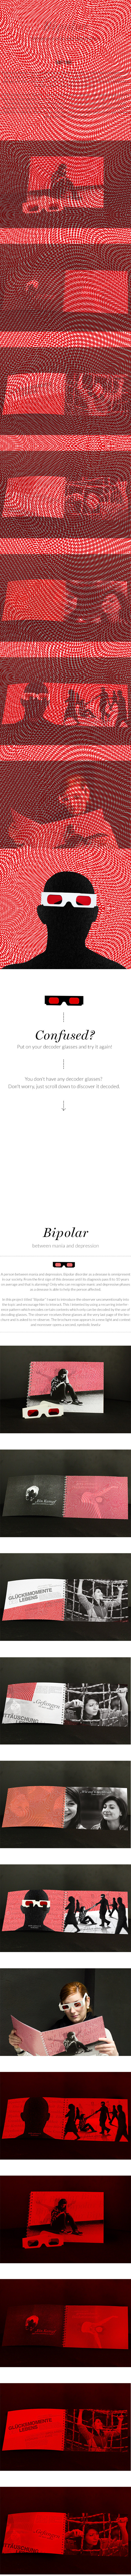 bipolar decoder glasses brochure Kevin May mania depression Observe discover print art editorial disorder unconventional Decoding